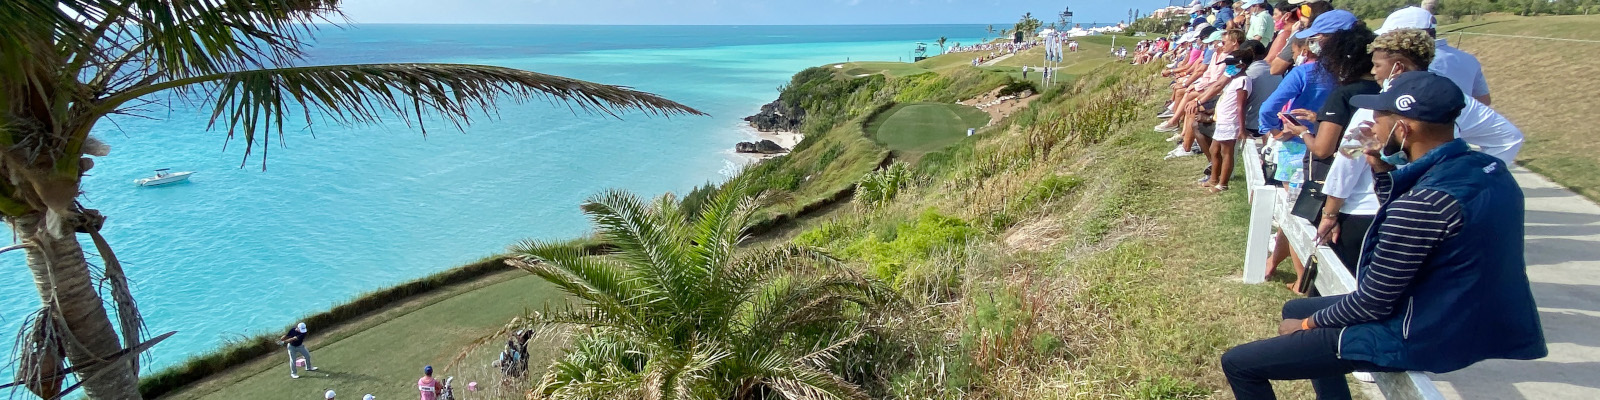 Bermuda Championship (Photo by Getty Images)